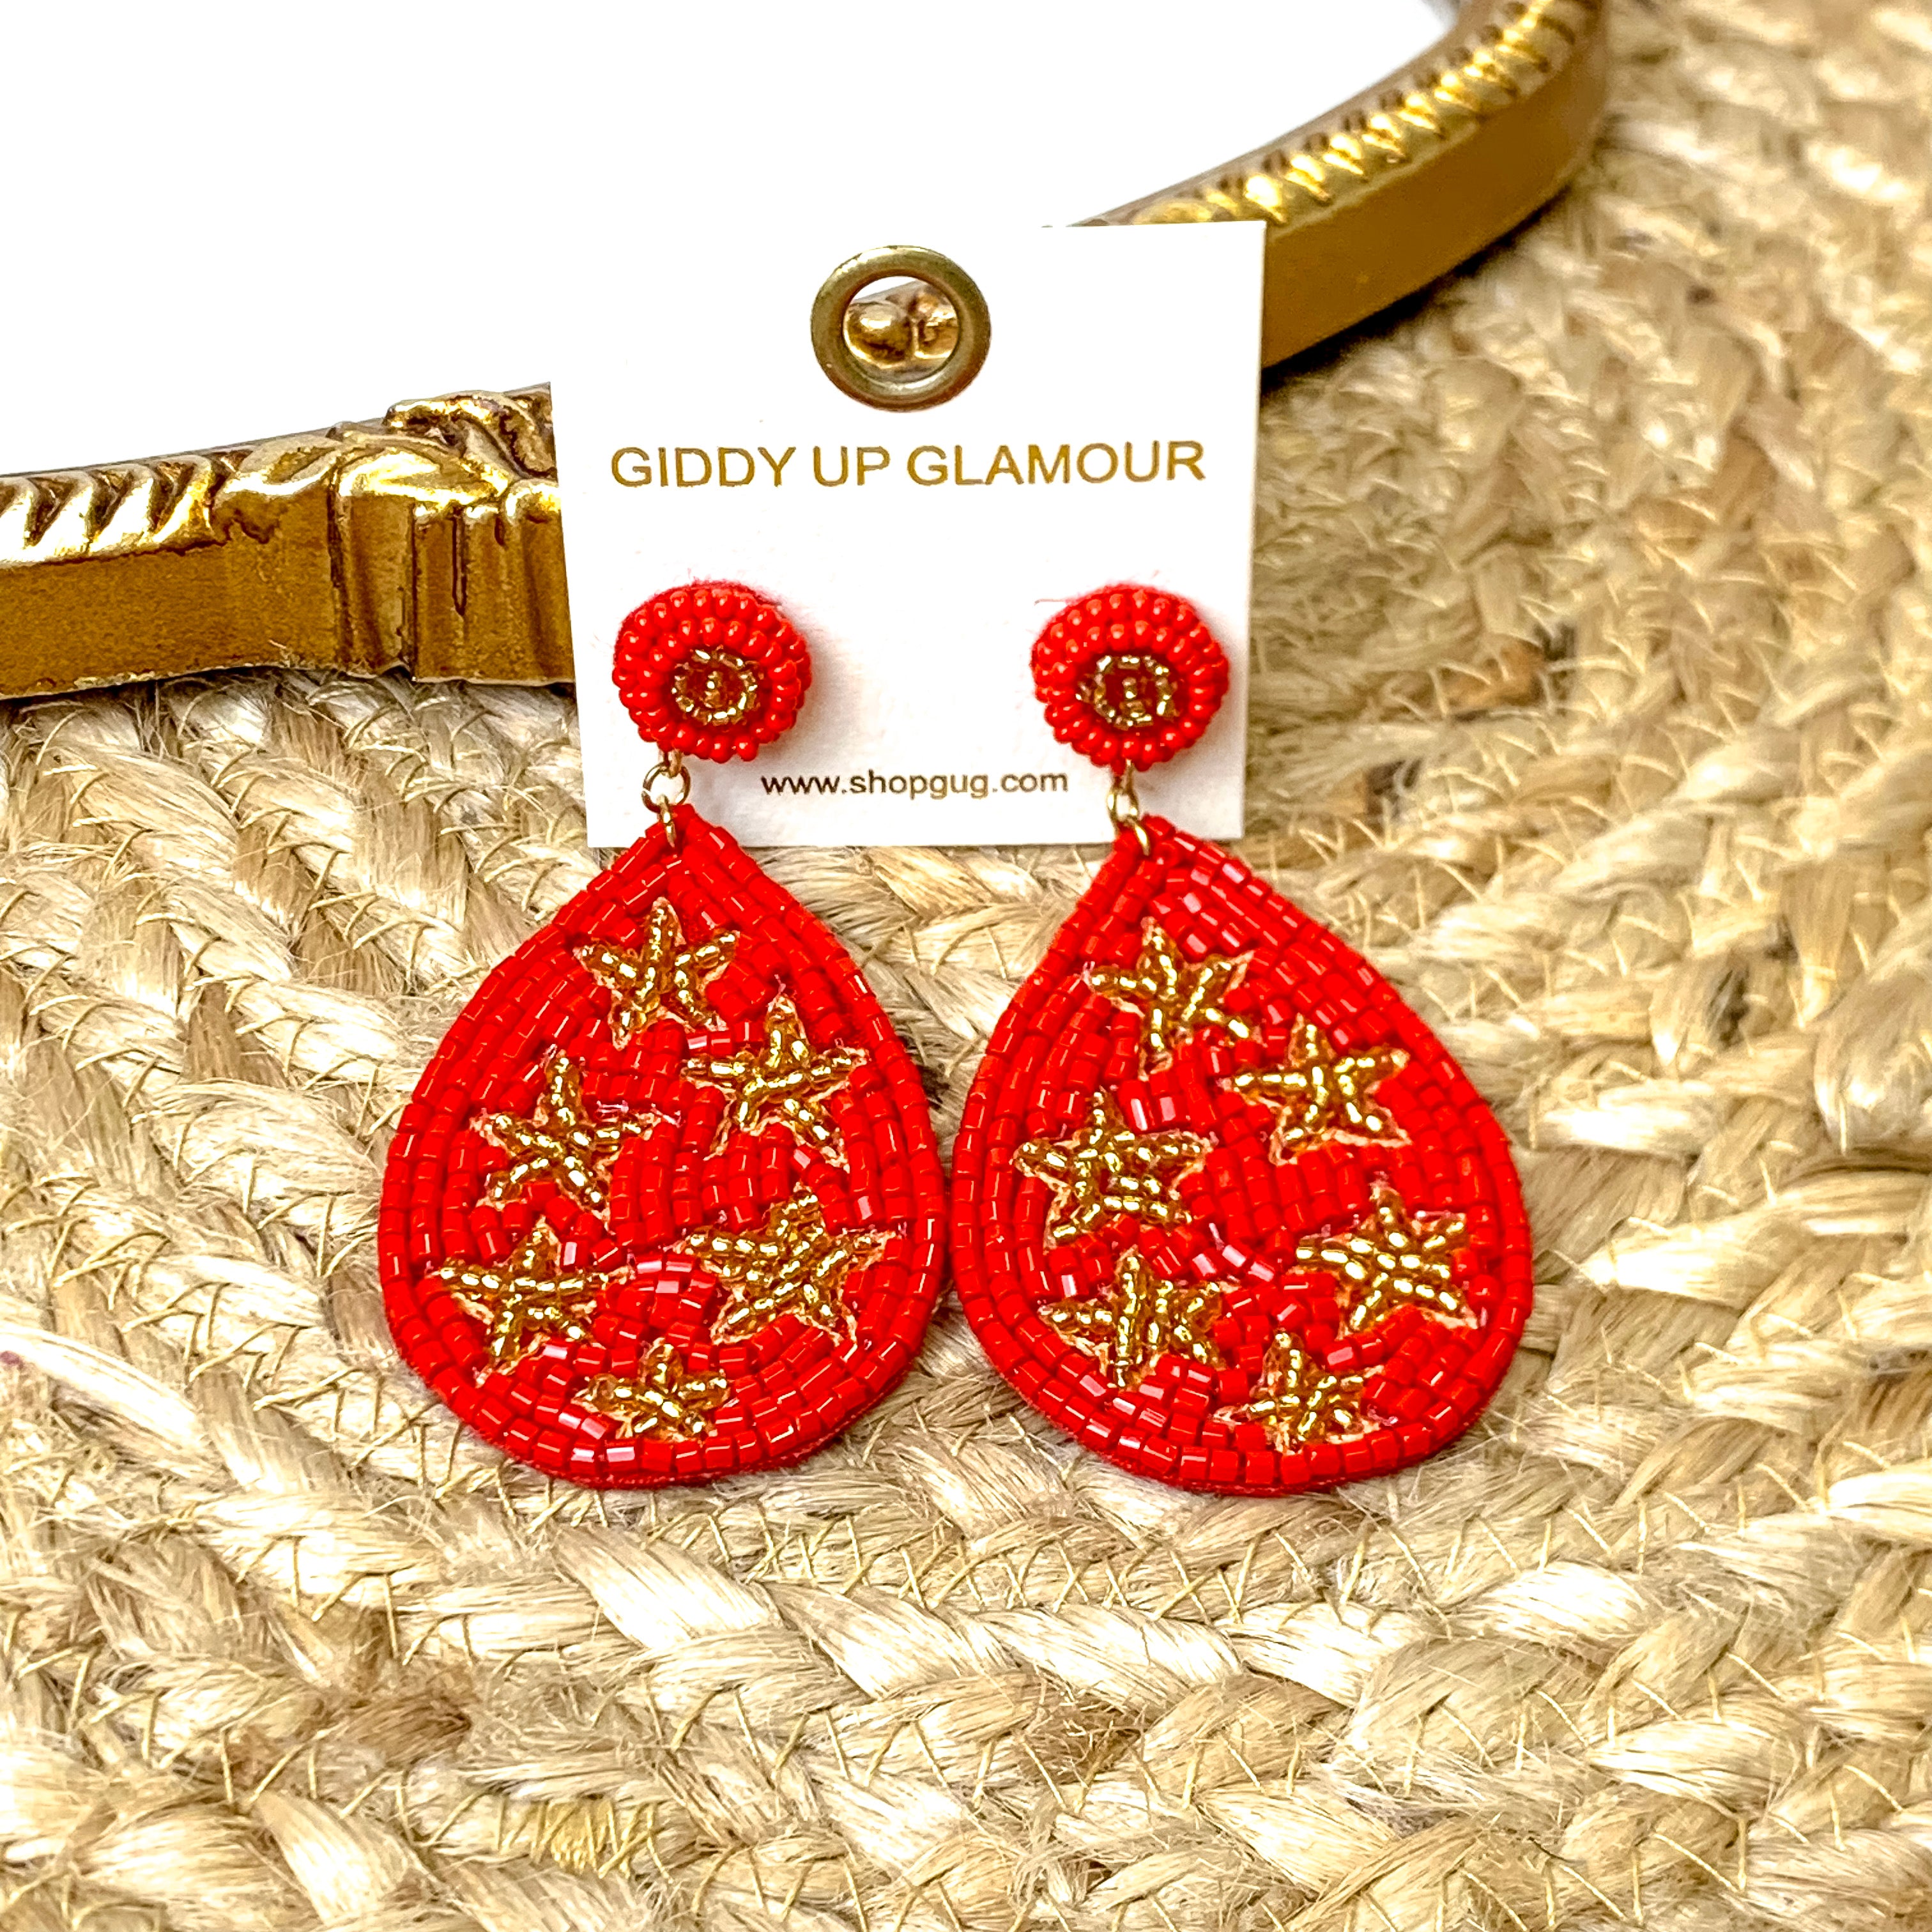 Beaded Teardrop Dangle Earrings with Stars in Red and Gold - Giddy Up Glamour Boutique